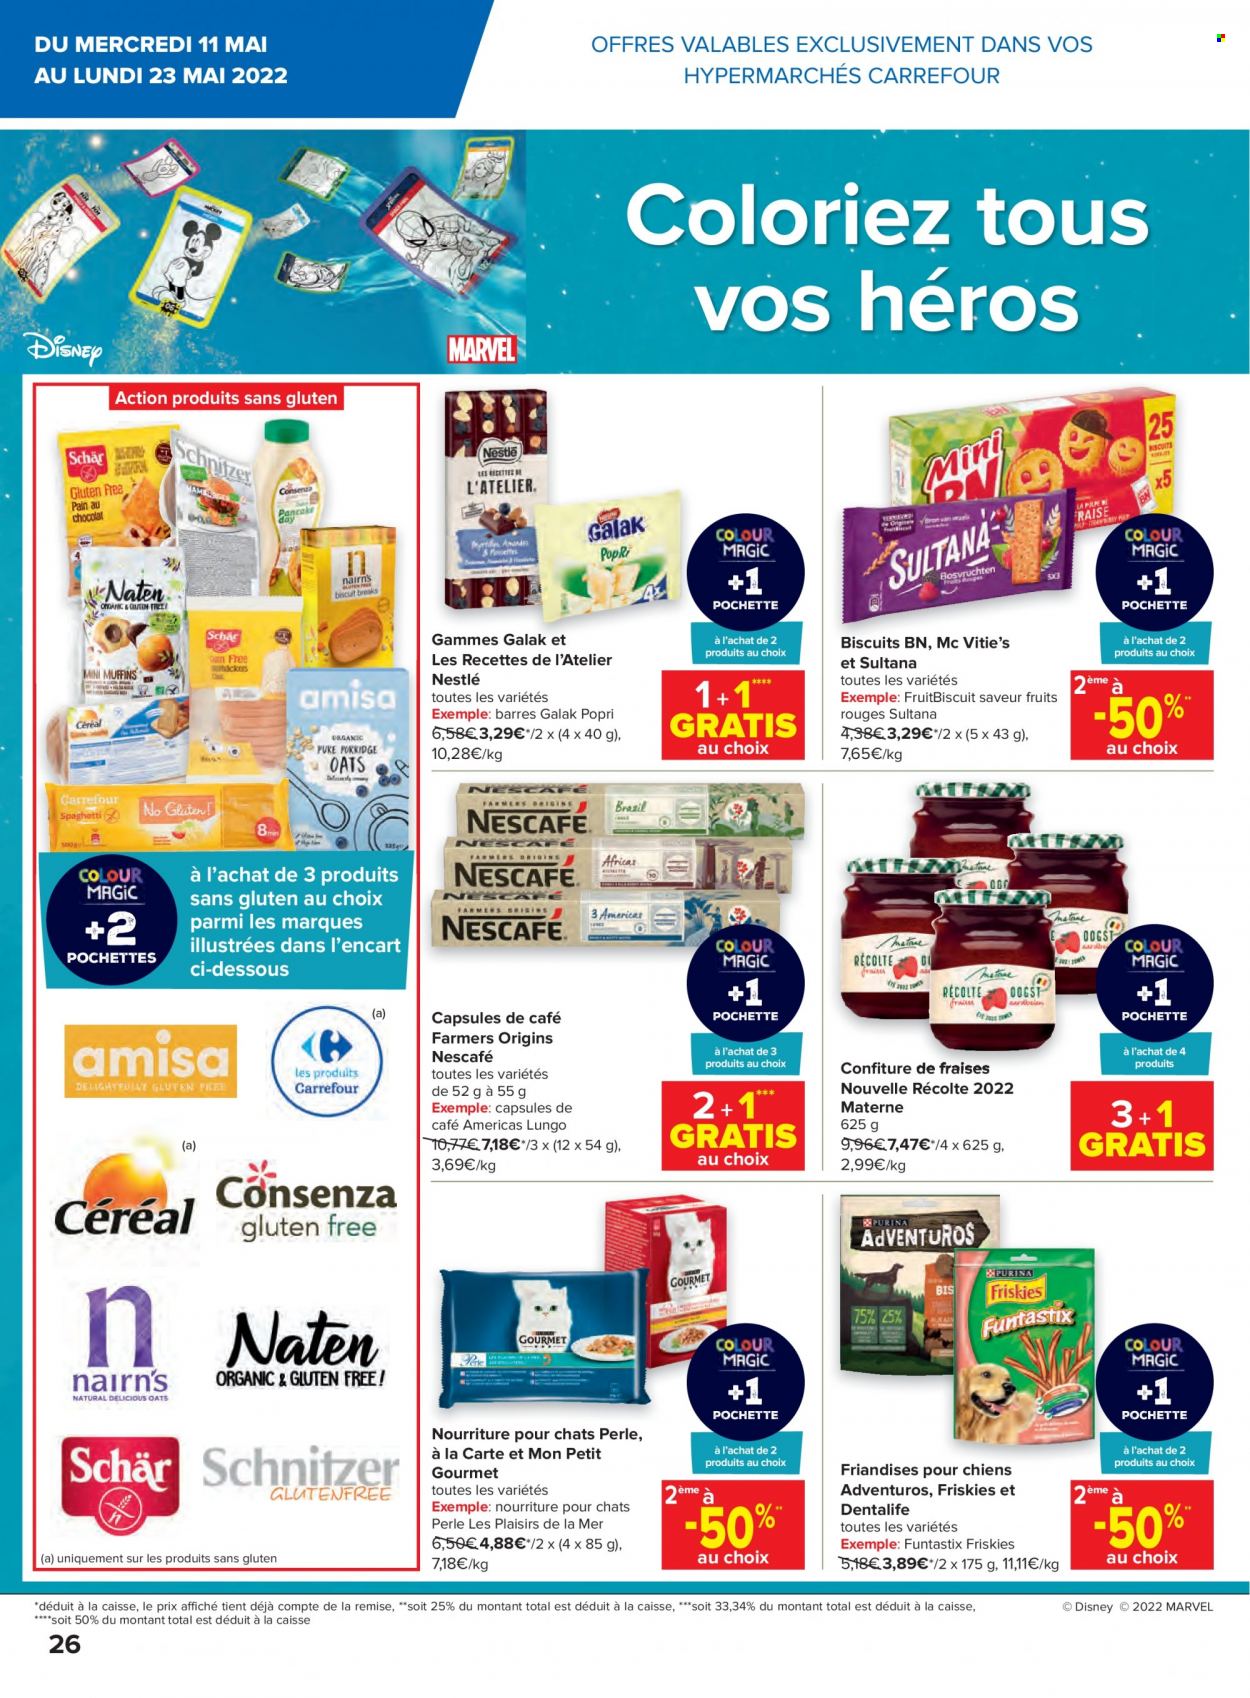 Catalogue Carrefour hypermarkt - 11.5.2022 - 23.5.2022. Page 26.